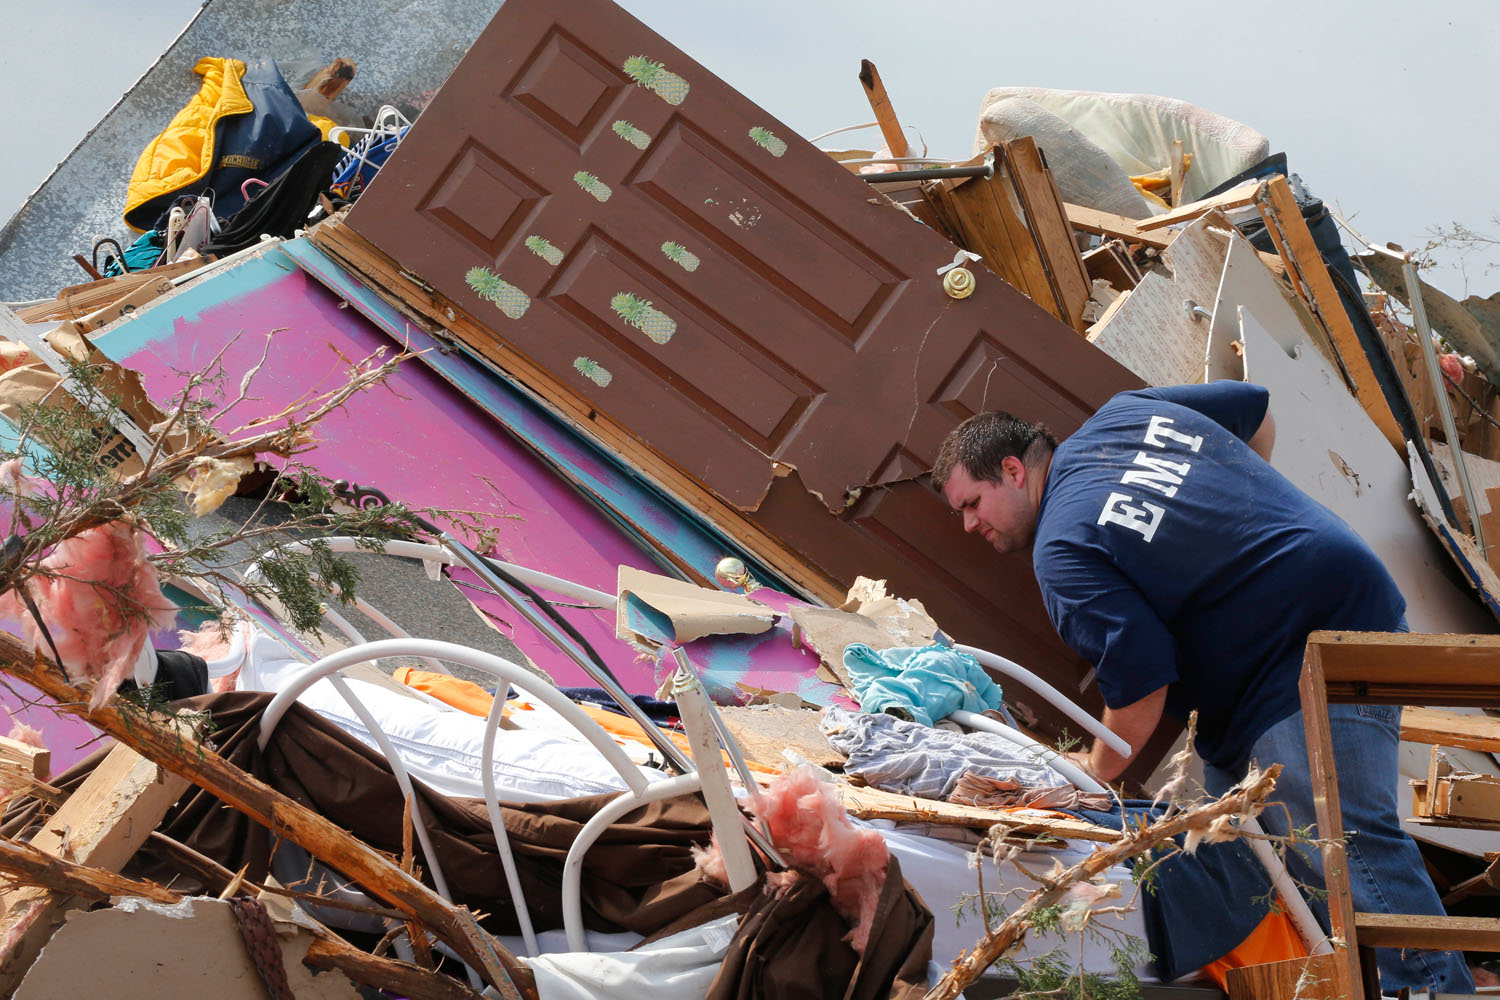 May 20, 2013. A man searches through the rubble of his mobile home, in the Steelman Estates Mobile Home Park, destroyed by a tornado, near Shawnee, Okla.